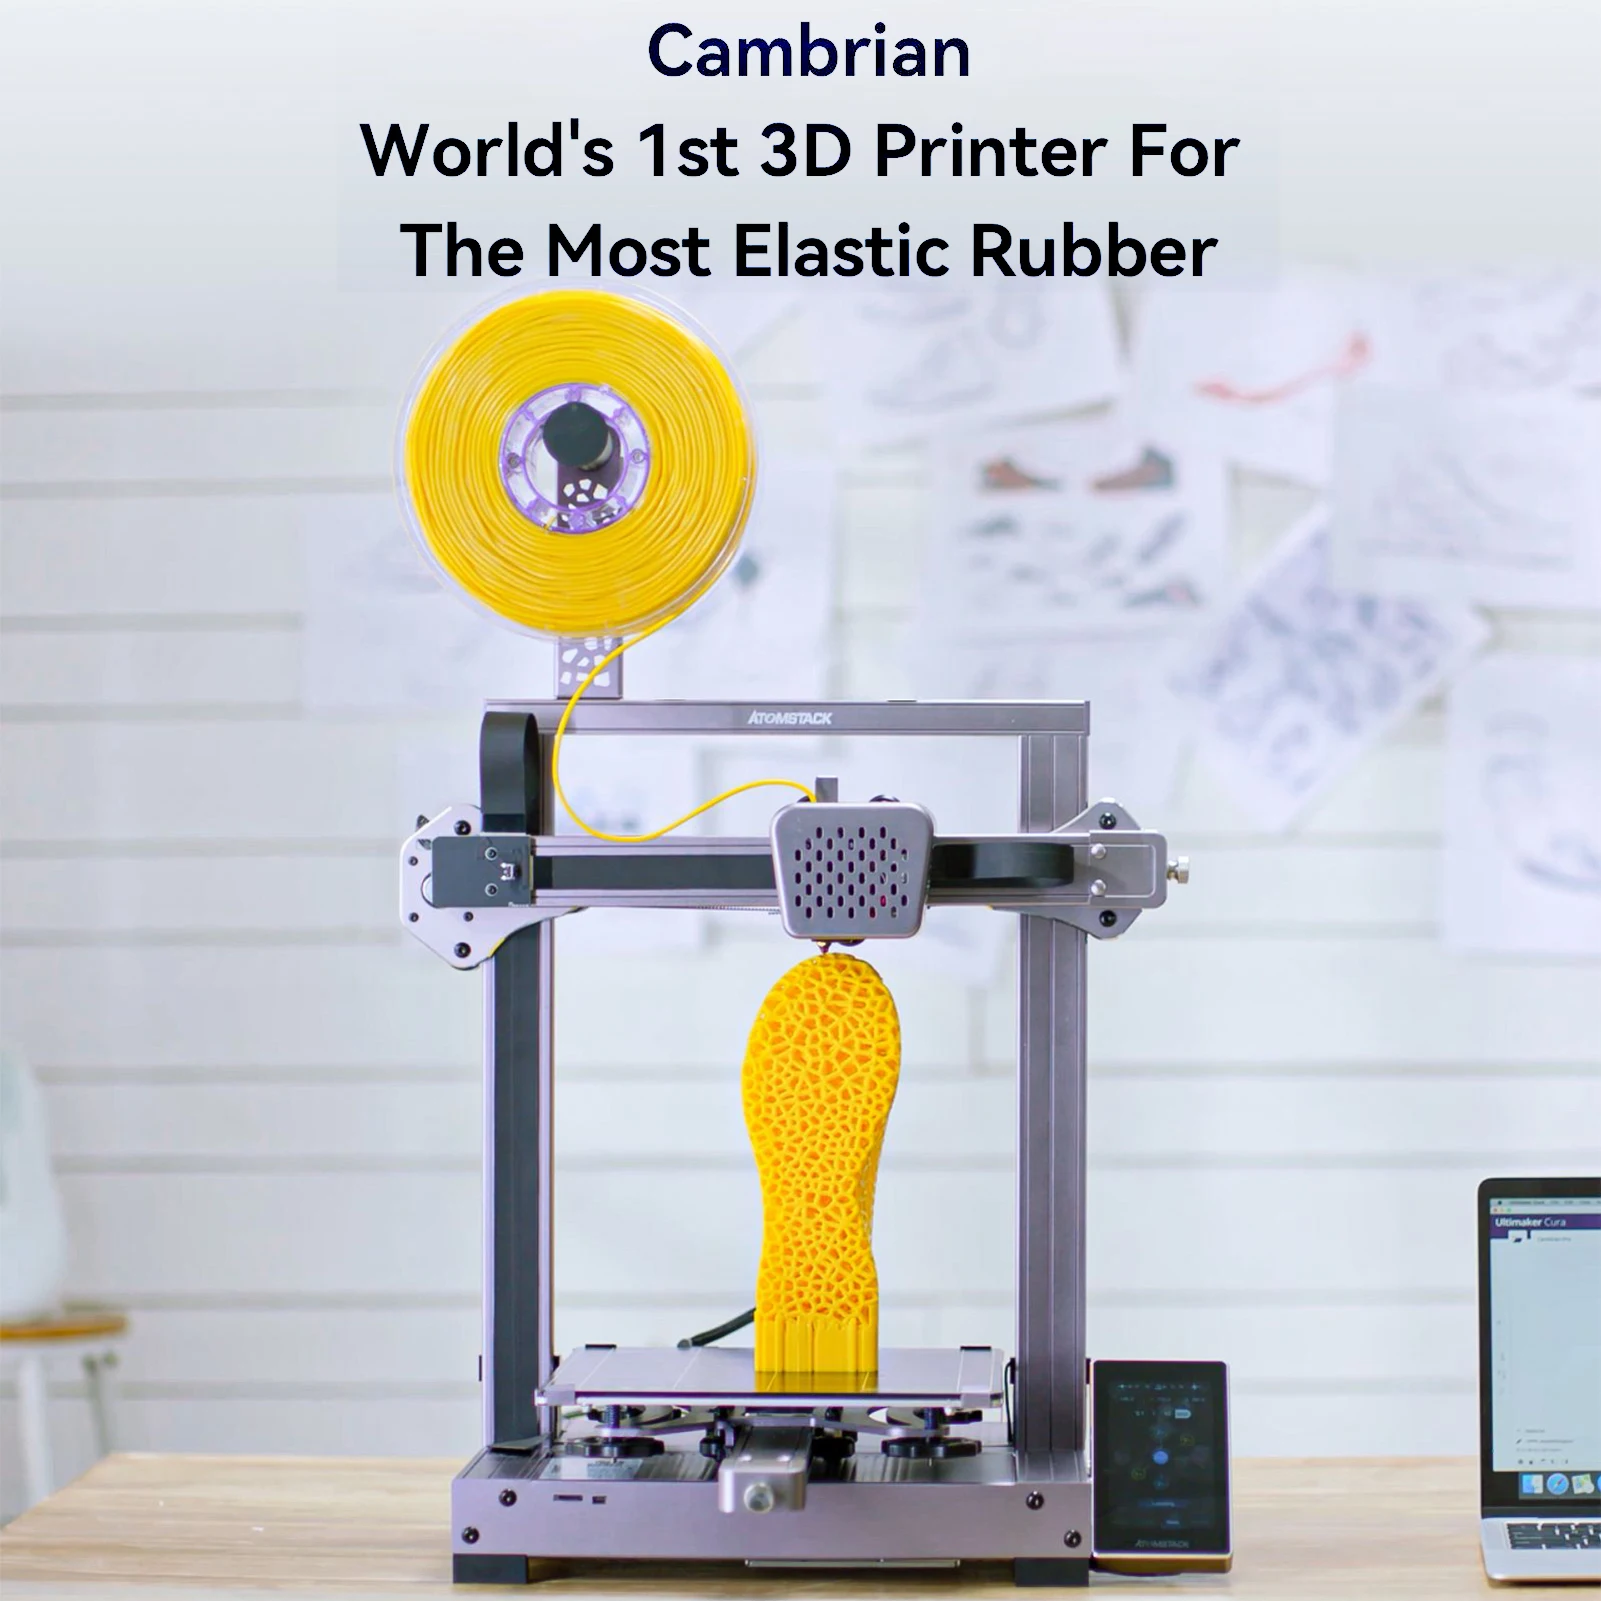 ATOMSTACK Cambrian Pro Desktop Rubber 3D Printer 235x235x250mm Support Printing Elastic TPR/PLA//Rubber with Dual Printing Head